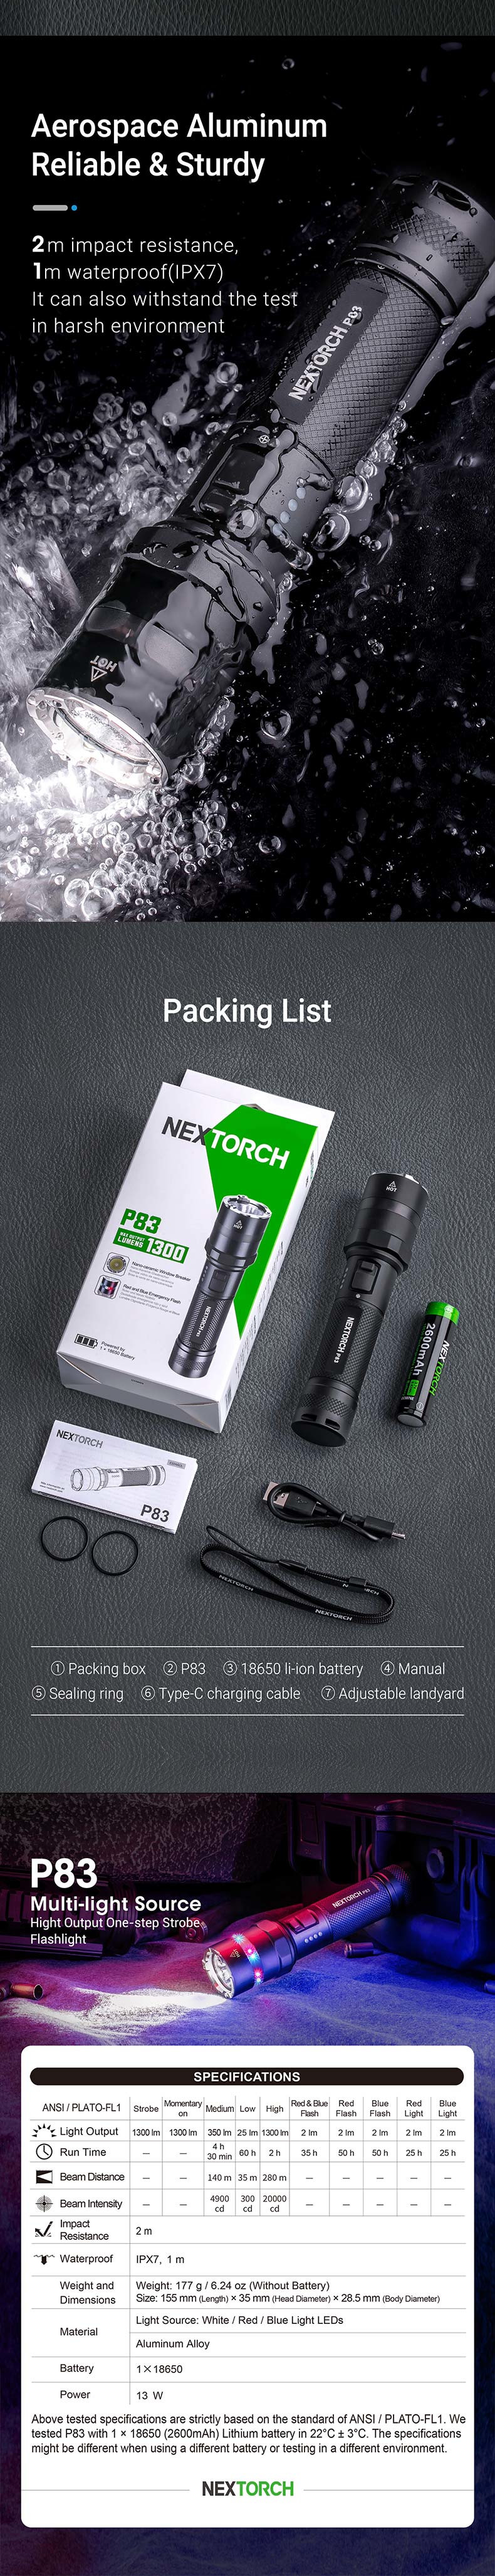 NEXTORCH-P83-Multi-light-Source-One-step-Strobe-Tactical-Flashlight-1300lm-280m-High-Output-18650-Ty-1959441-6